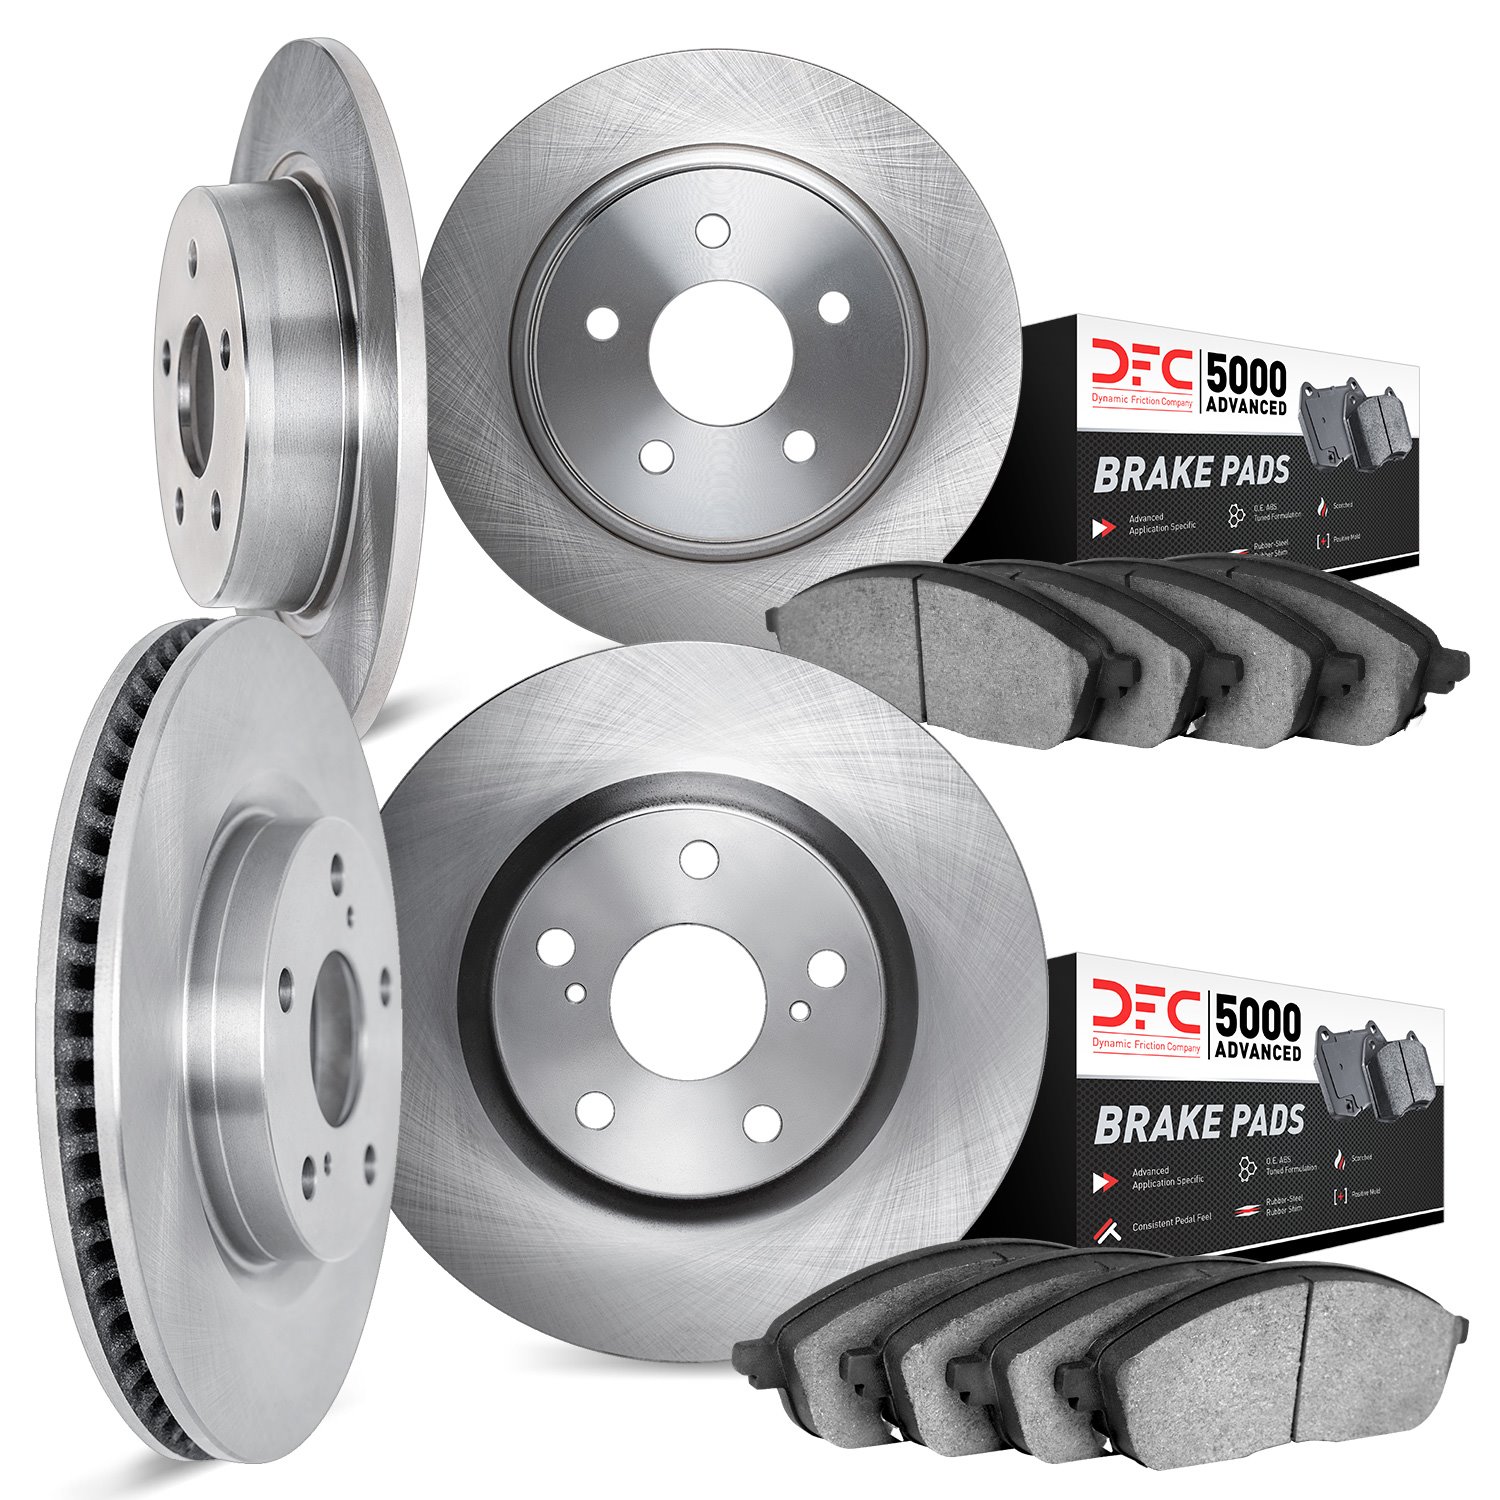 6504-63033 Brake Rotors w/5000 Advanced Brake Pads Kit, 2014-2017 Mercedes-Benz, Position: Front and Rear